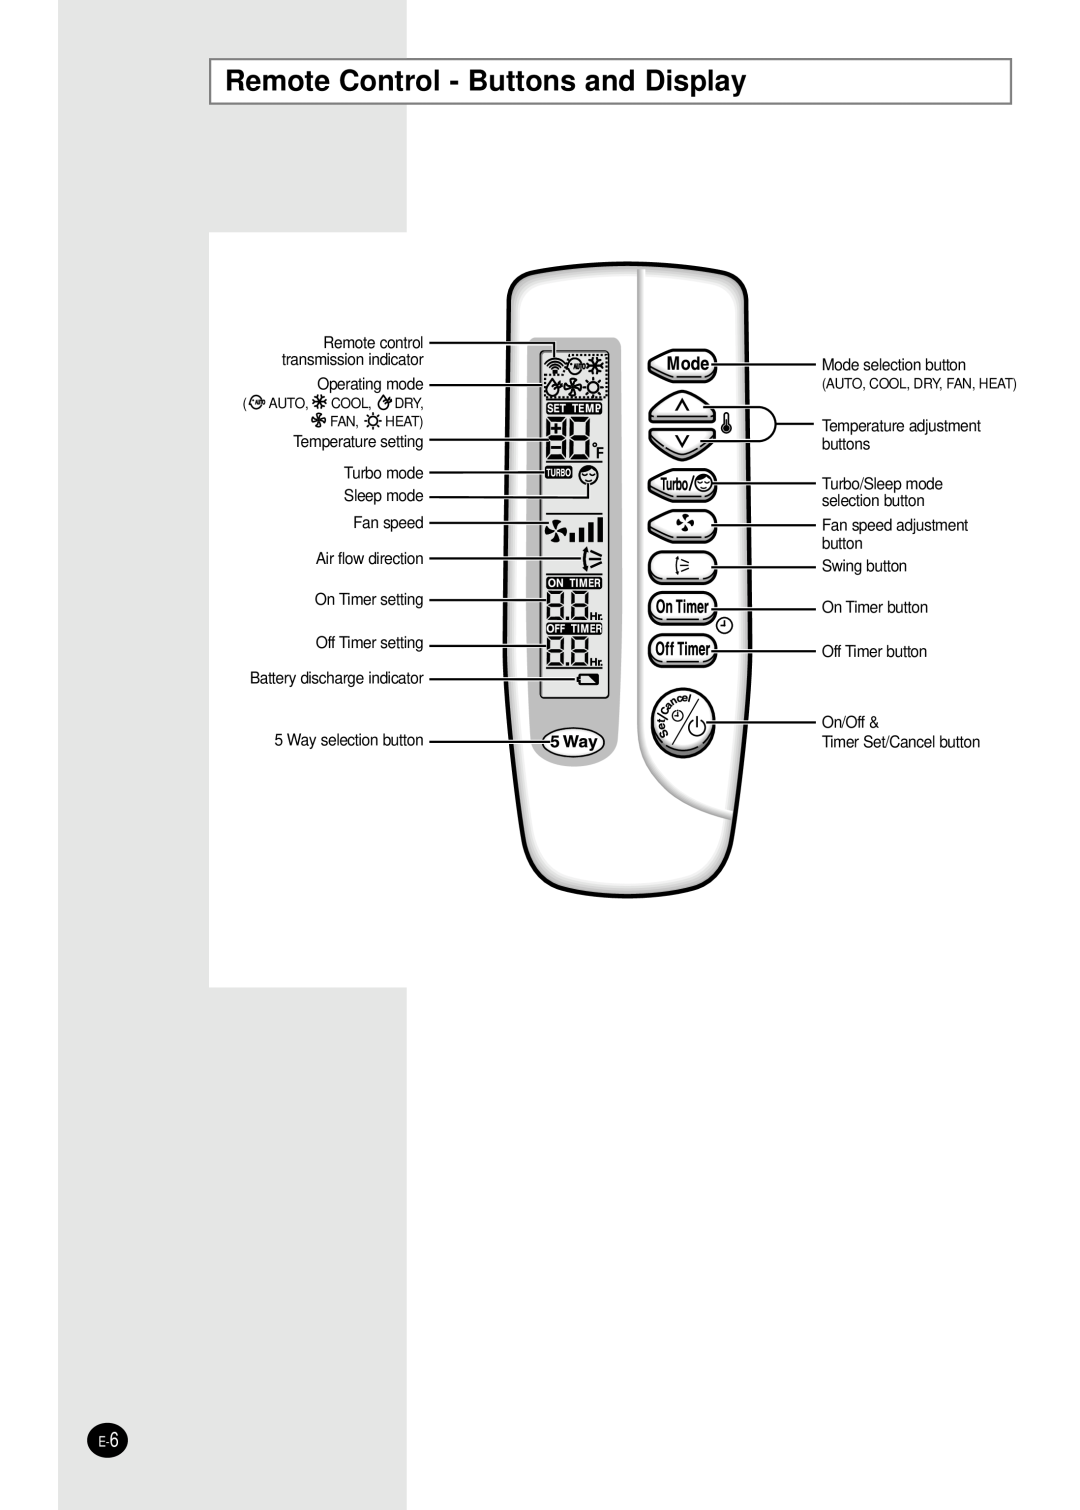 Samsung AQ30C1(2)BC installation manual Remote Control - Buttons and Display 